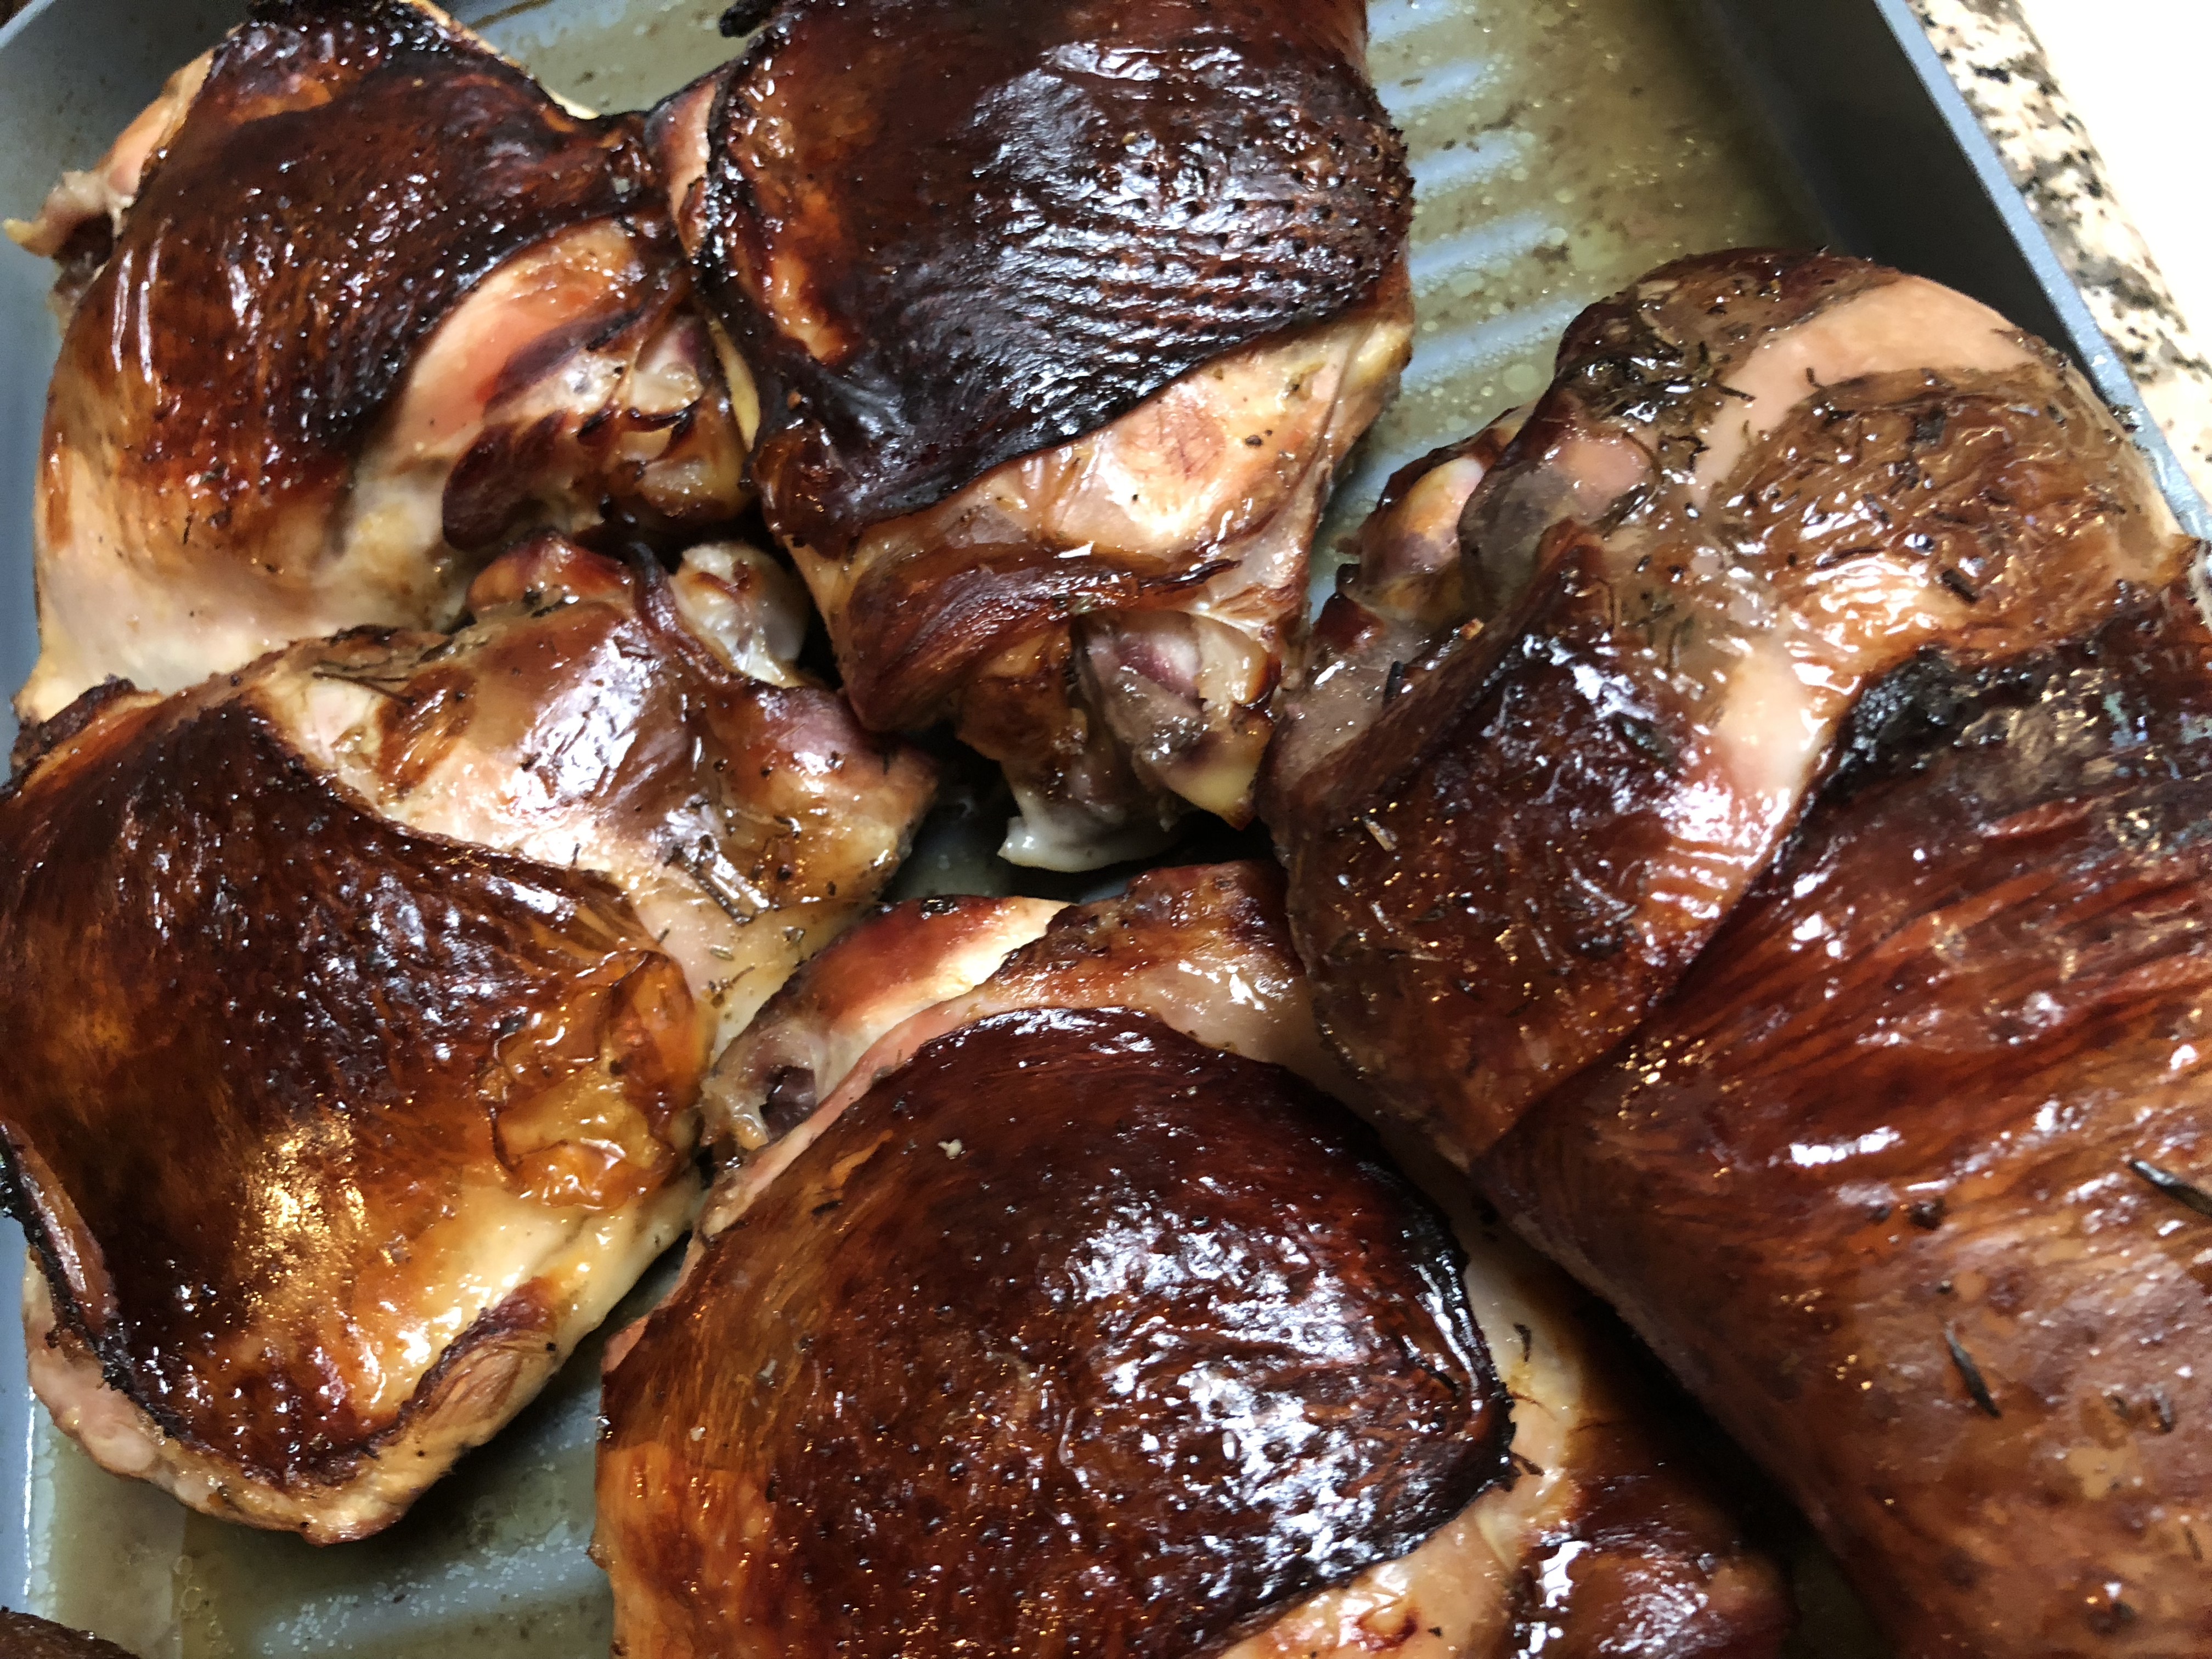 RECIPE FOR SMOKED TURKEY THIGHS